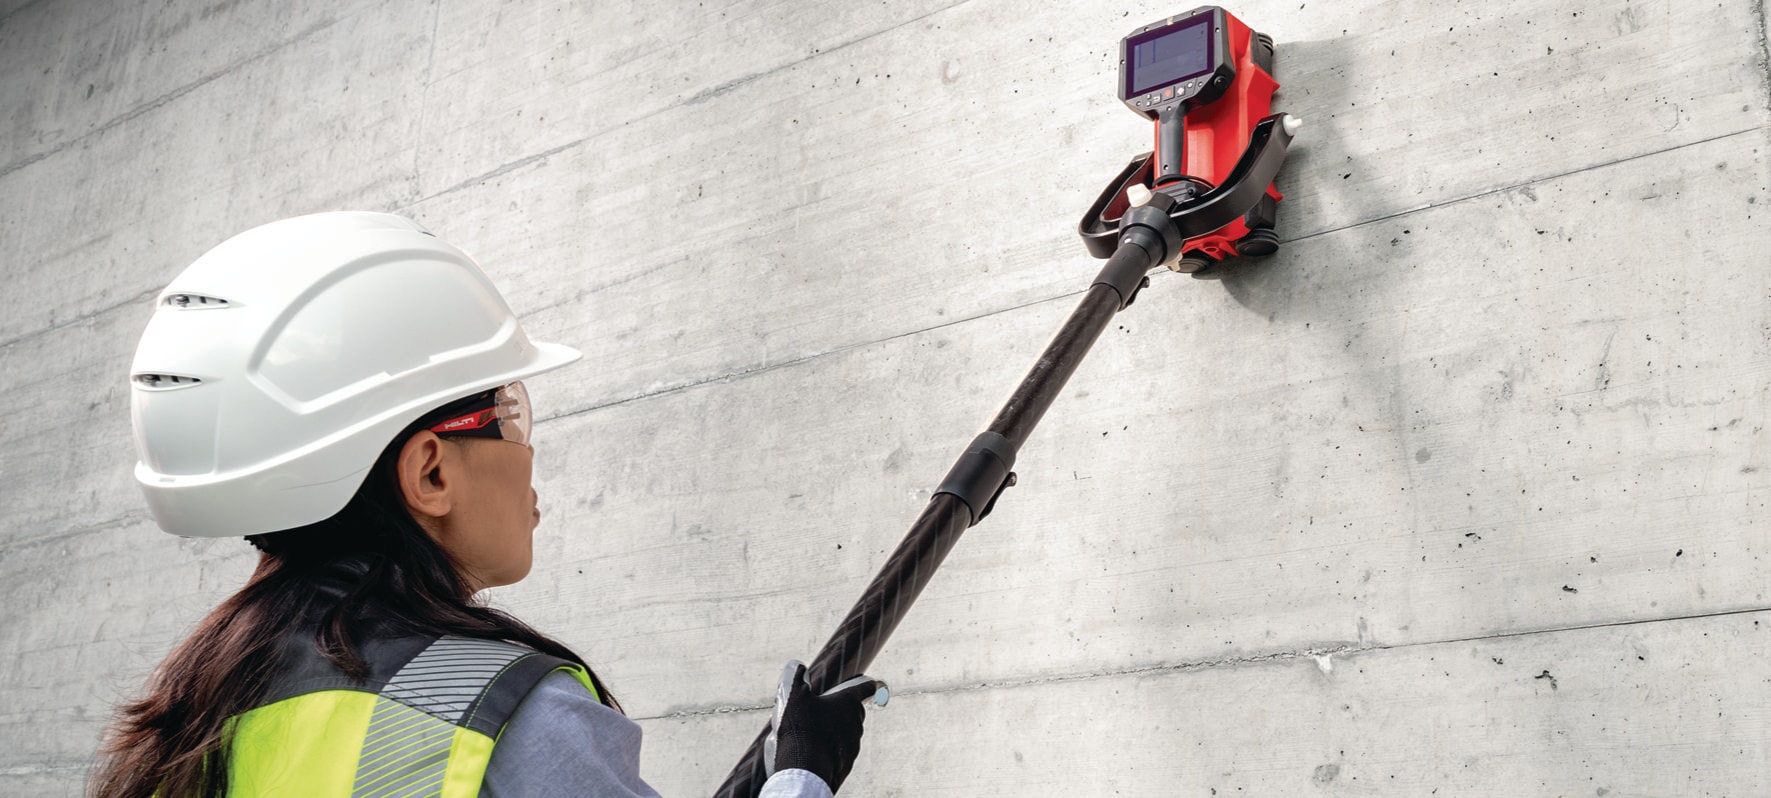 PS 300 Ferroscan system - Concrete Scanners - Hilti Philippines